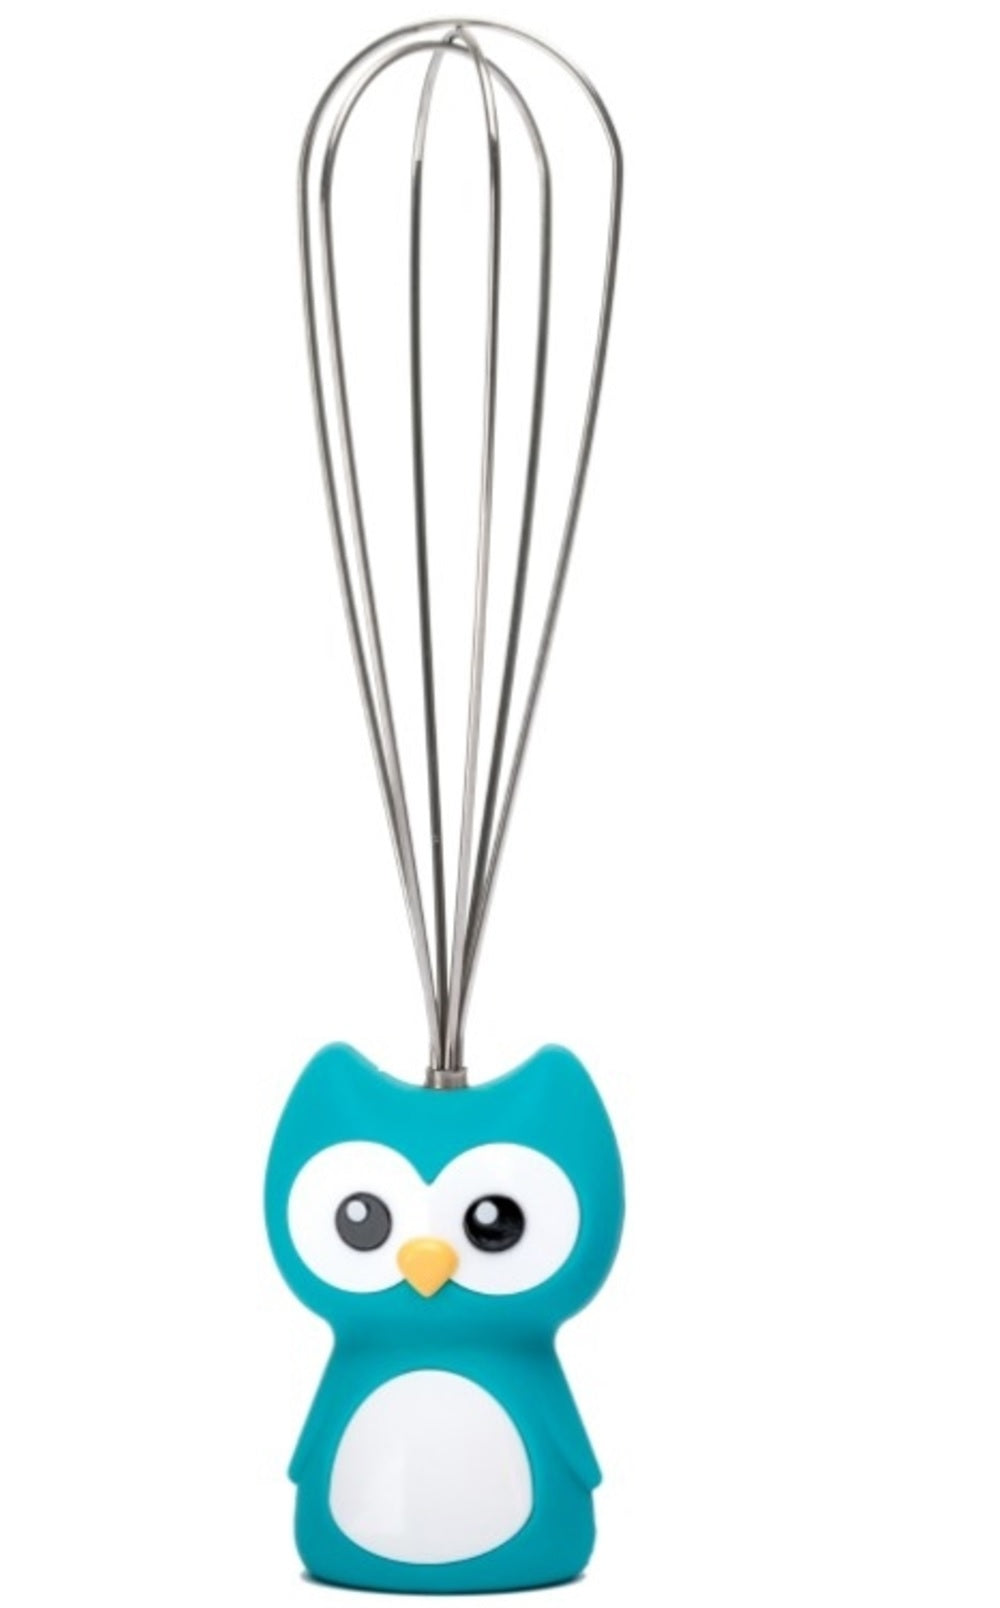 Joie MSC 10179 Hoot Mini Whisk, Assorted Colors